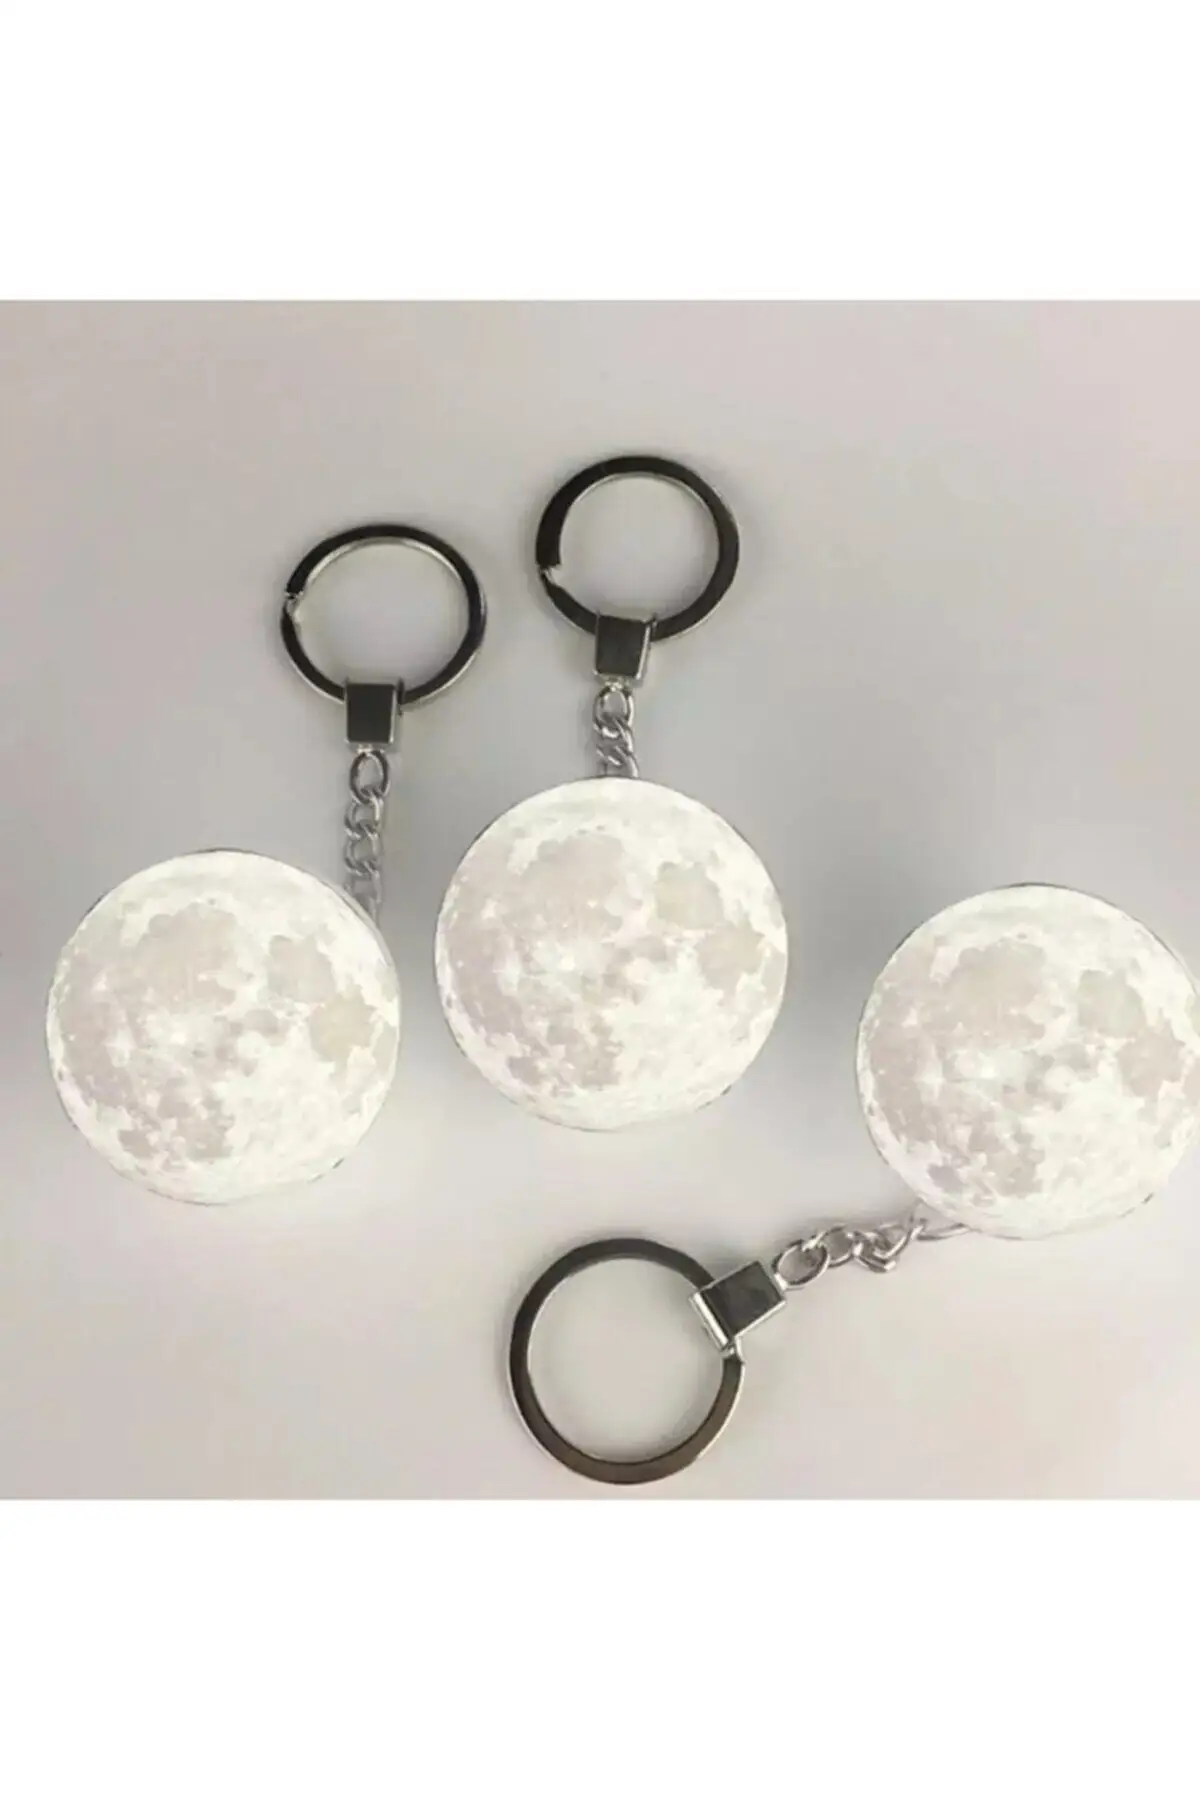 3d Moon Lamp Luminous Moon Keychain Gift Products Light Emitting Mini Bulb Home Car Keychains Fashion Jewelry 10 pcs volleyball keychain family gifts for home trendy keychains metal presents